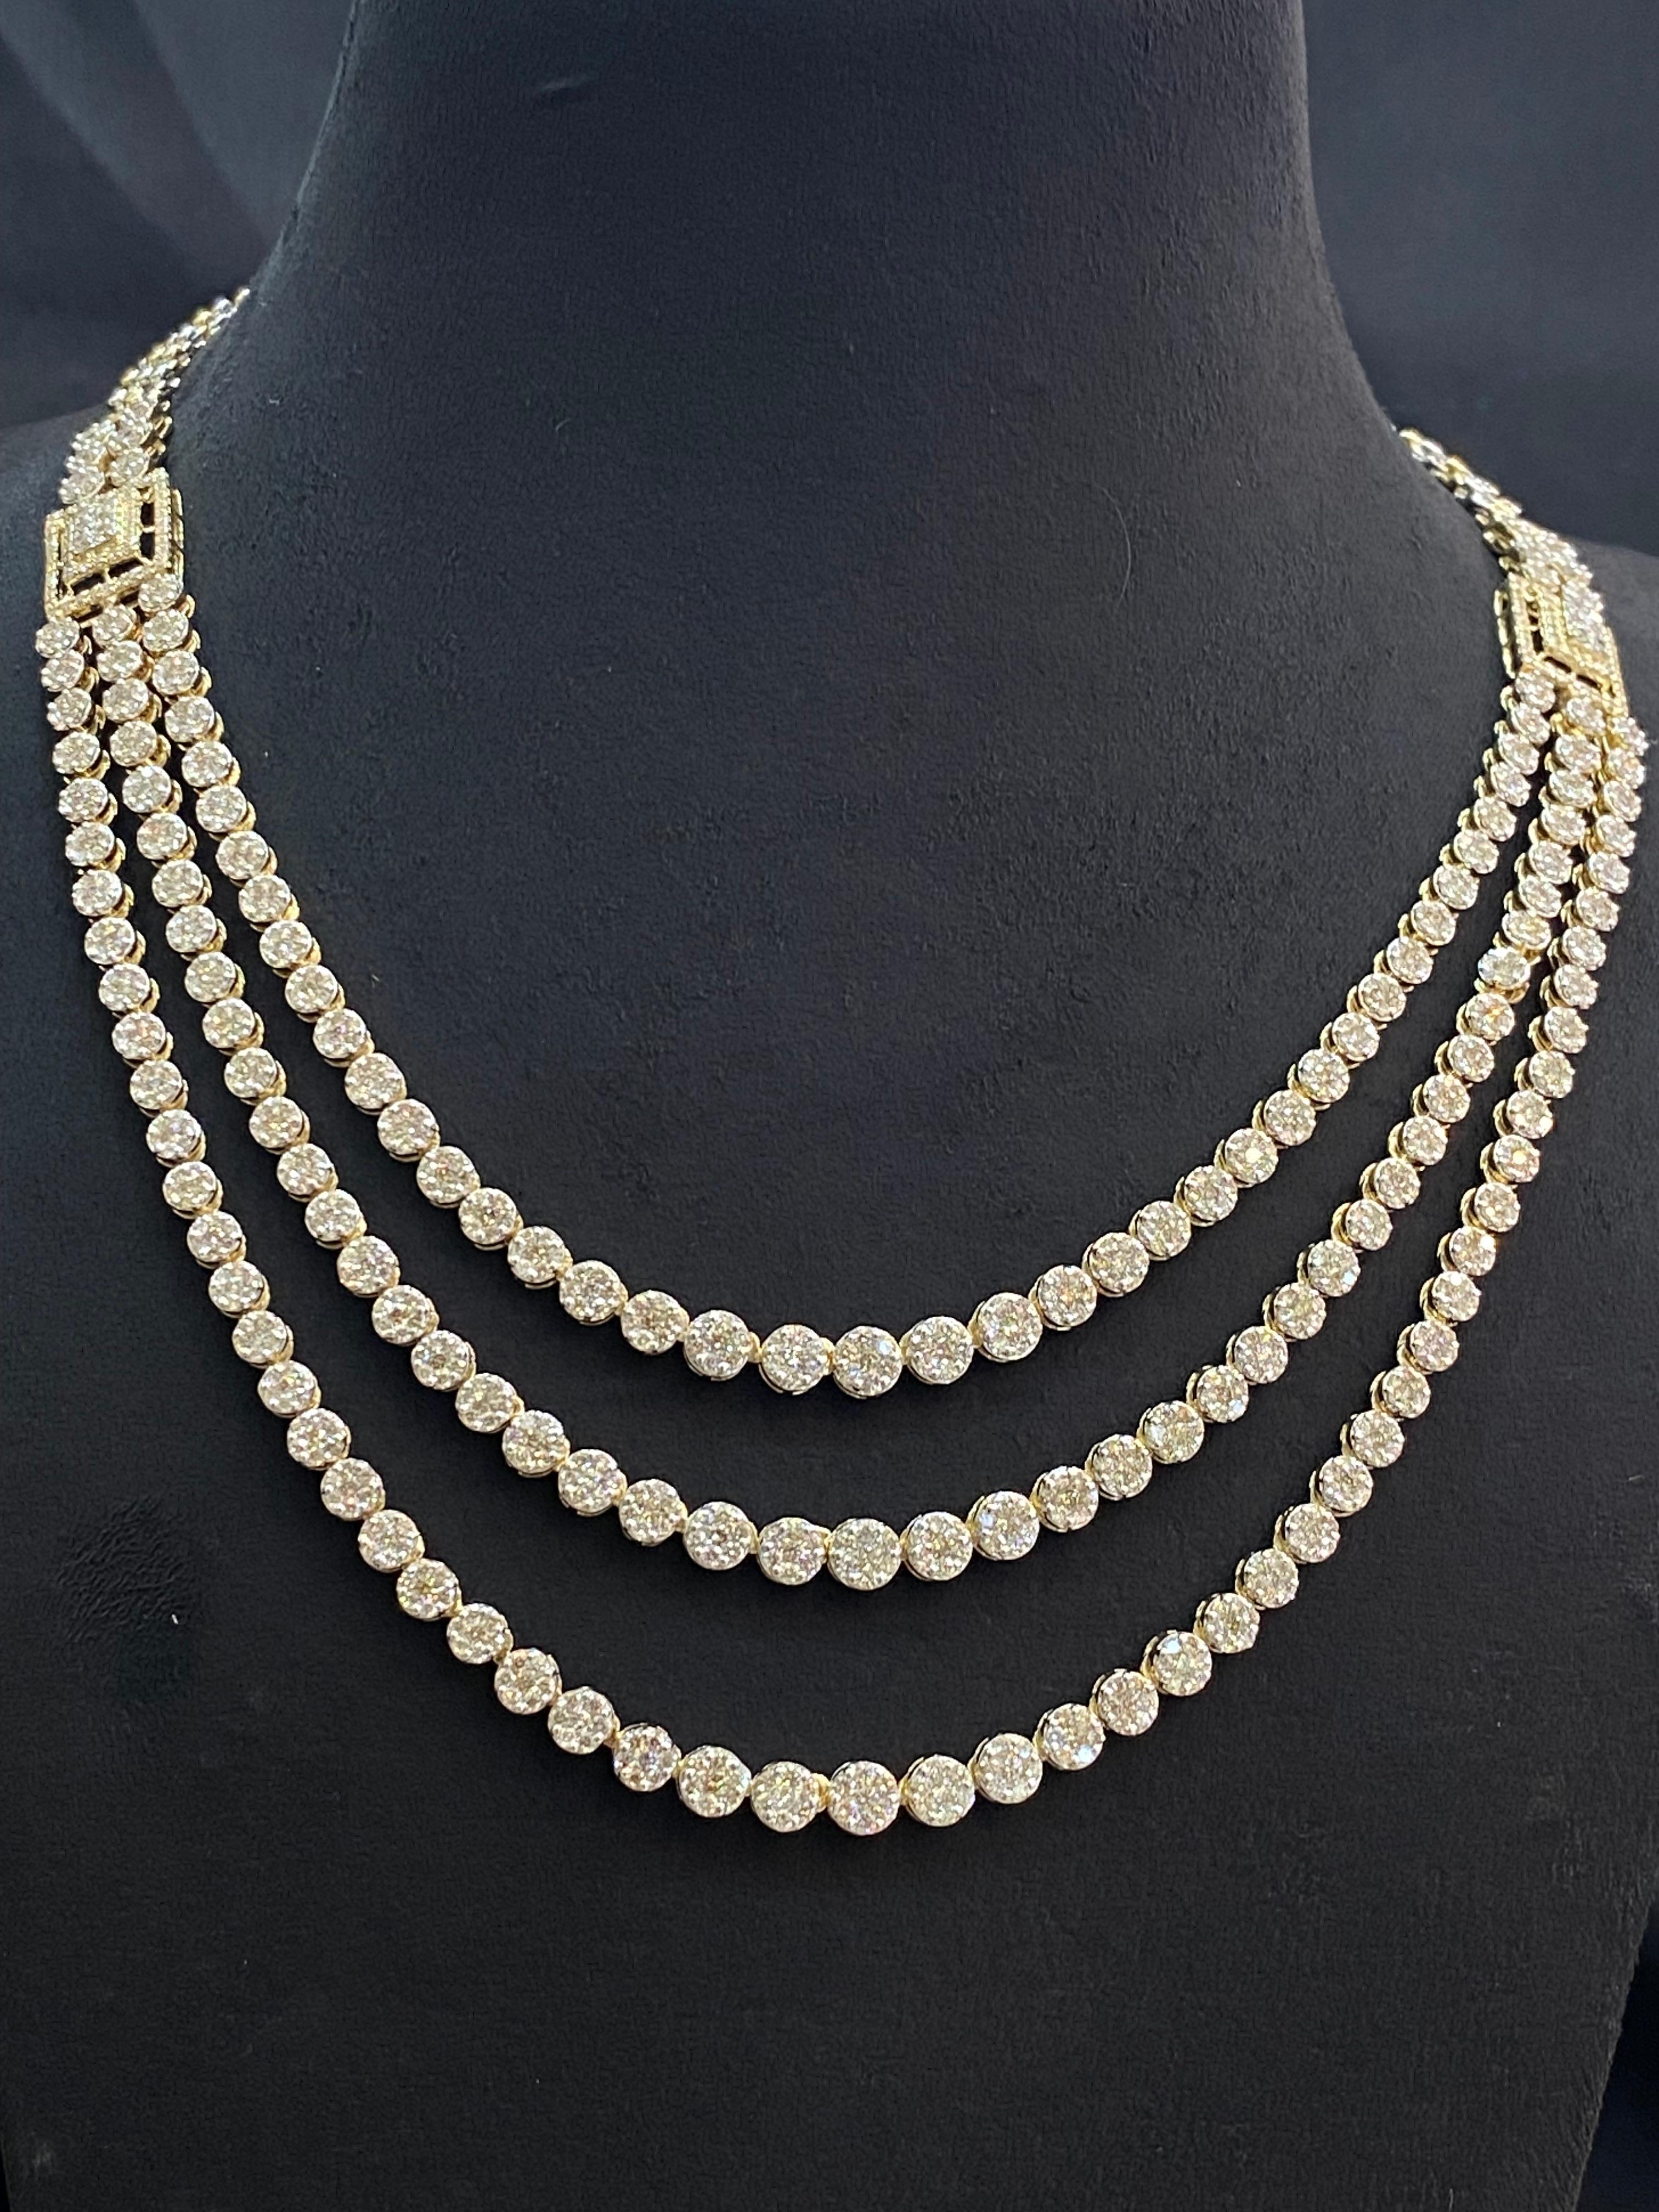 Adorn yourself with elegance and share joy with this intricately crafted 8.43 carat diamonds tennis necklace in 14K yellow gold, promising unmatched brilliance!

Specifications : 

Diamond Weight : 8.43 Carats
Diamond Shape : Round
Diamond Color